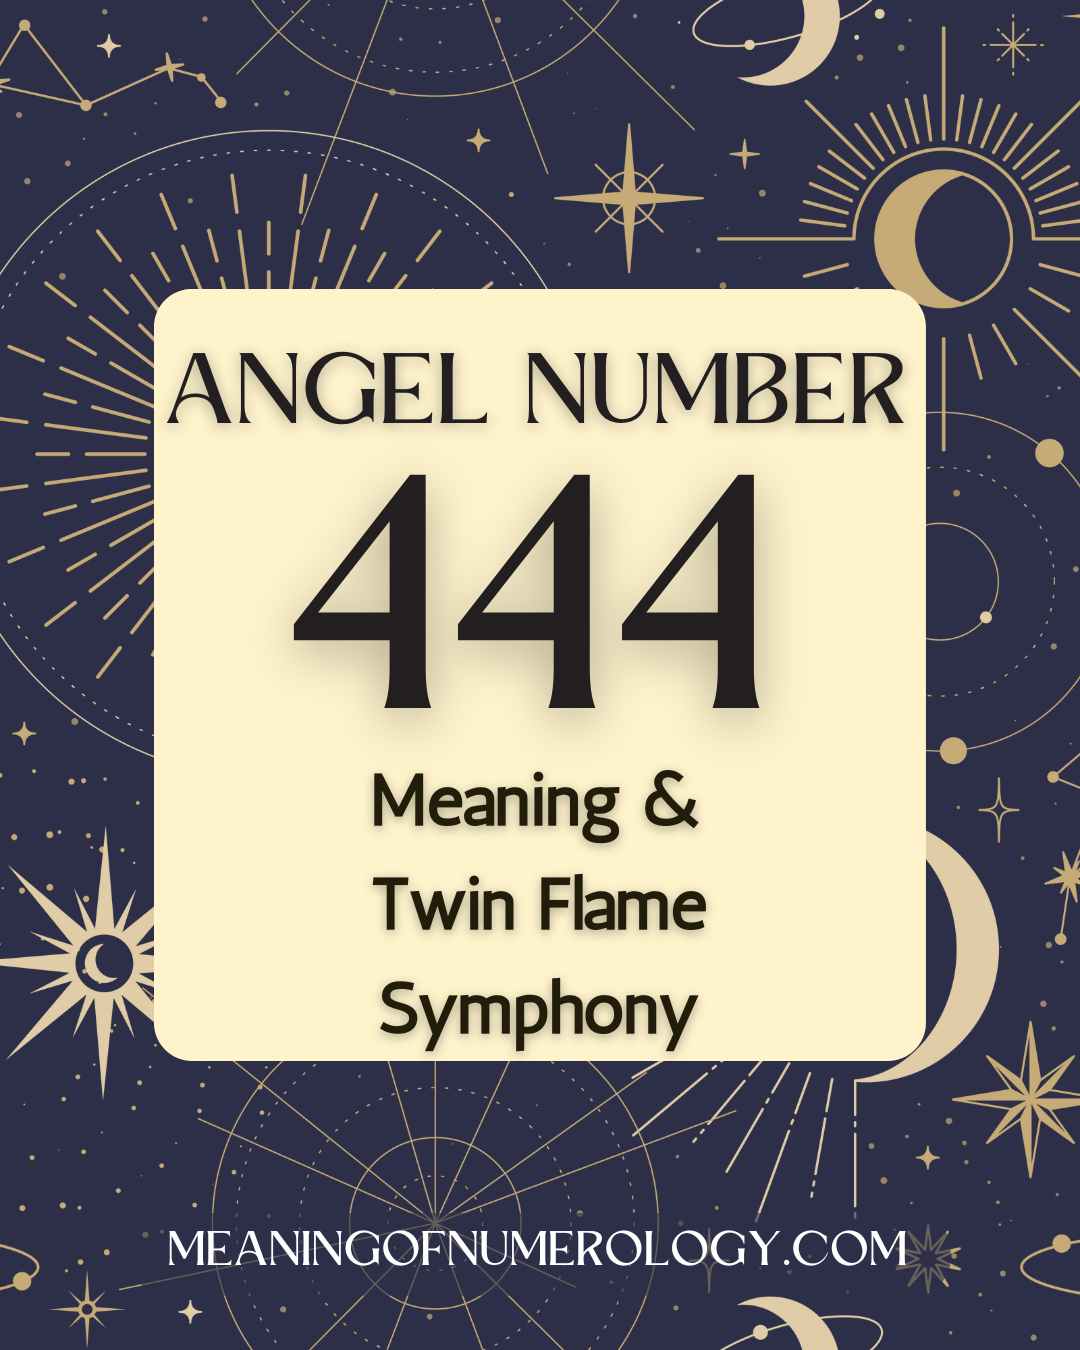 Purple Mystic Astrology Moon Angel Number 444 Meaning & Twin Flame Symphony